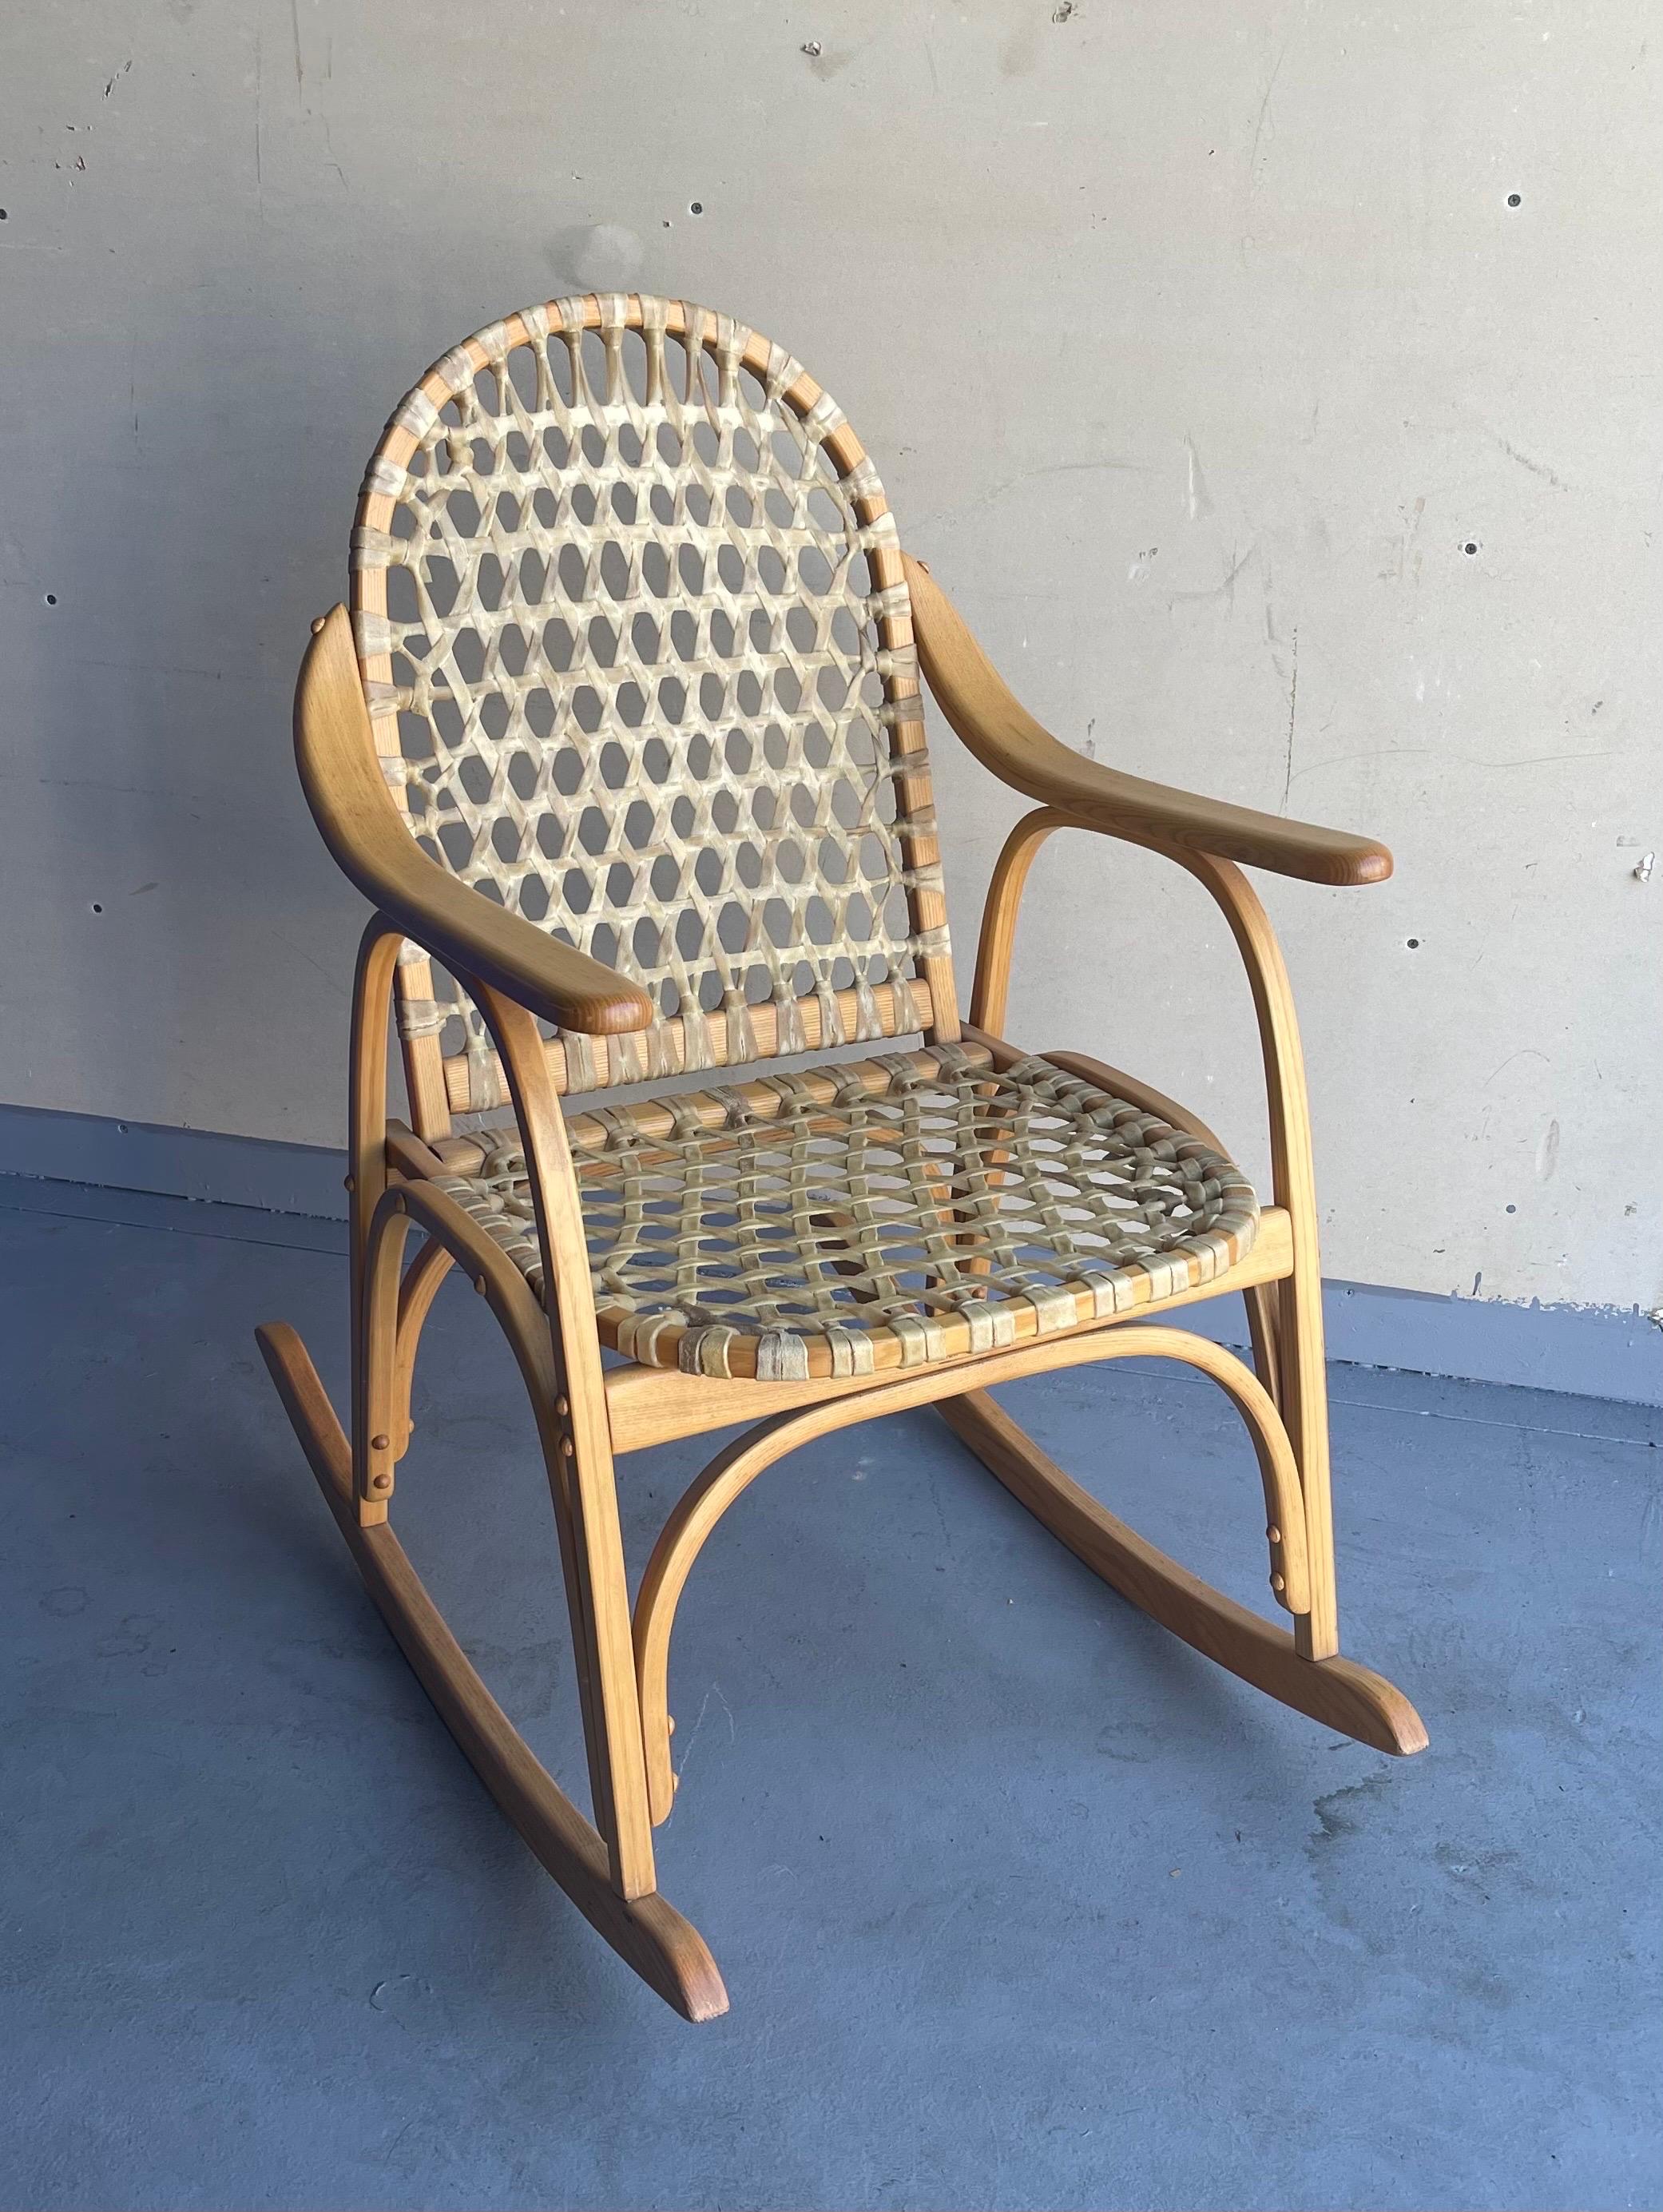 Vintage snowshoe cocking chair by Iverson Snowshoe Co. in Michigan's Upper Peninsula, circa 1980s. A unique ‘snowshoe’ rocking chair, with a bentwood ash frame with a woven lattice of rawhide strips to the seat and back. The rocker is very sturdy